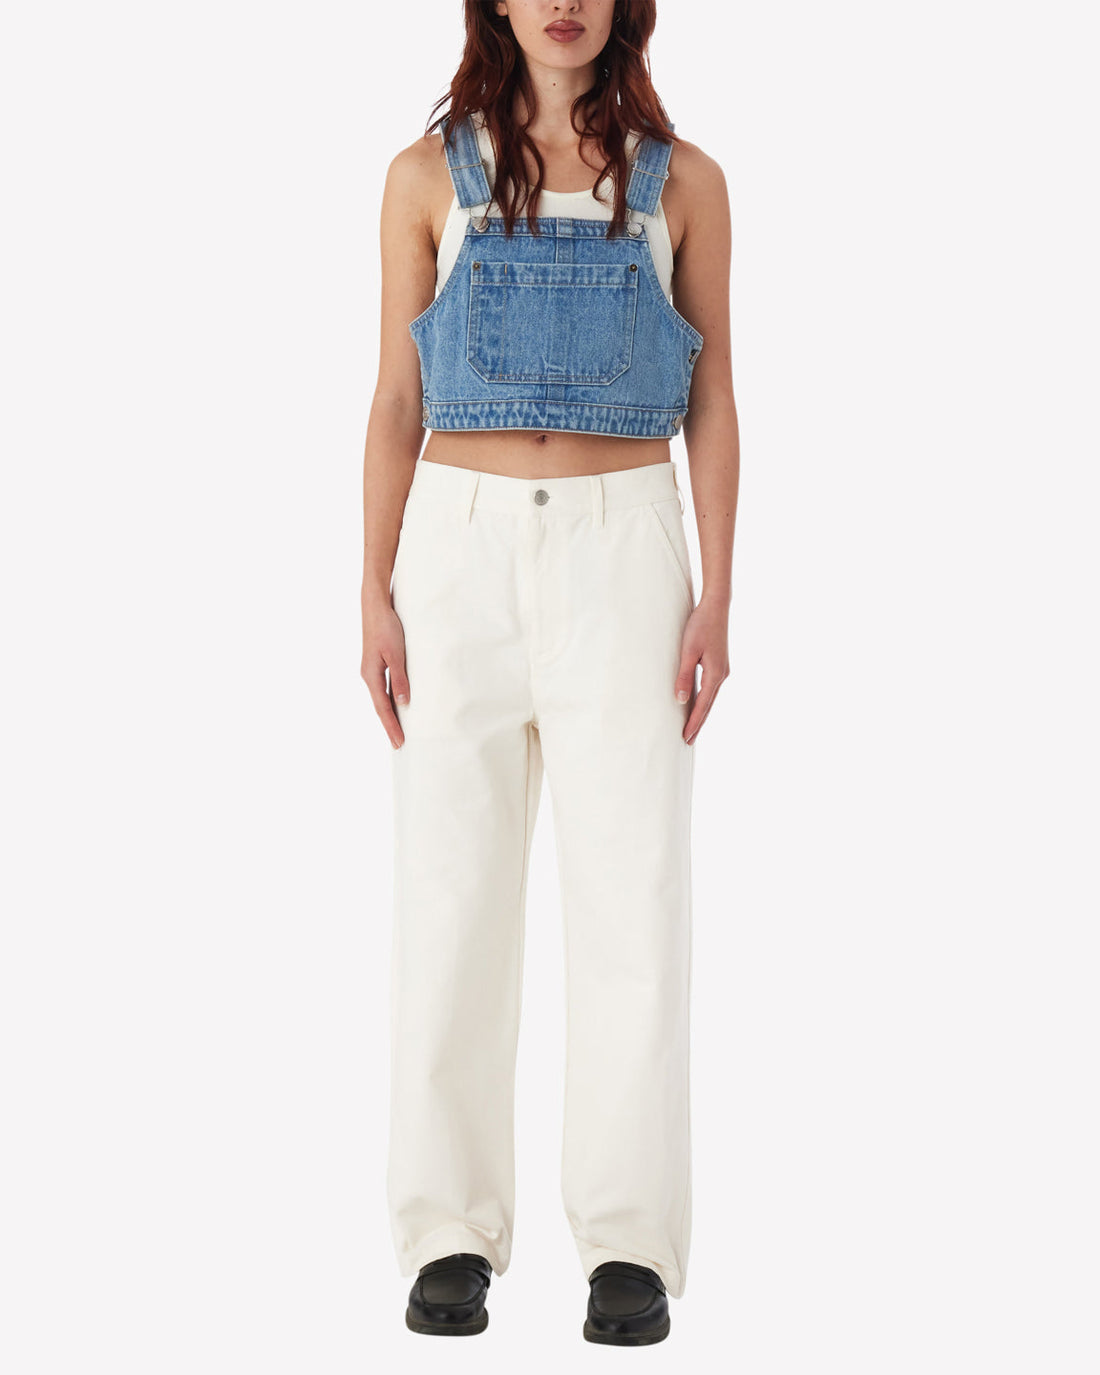 OBEY CROPPED OVERALL DENIM TOP SHIRT OBEY   